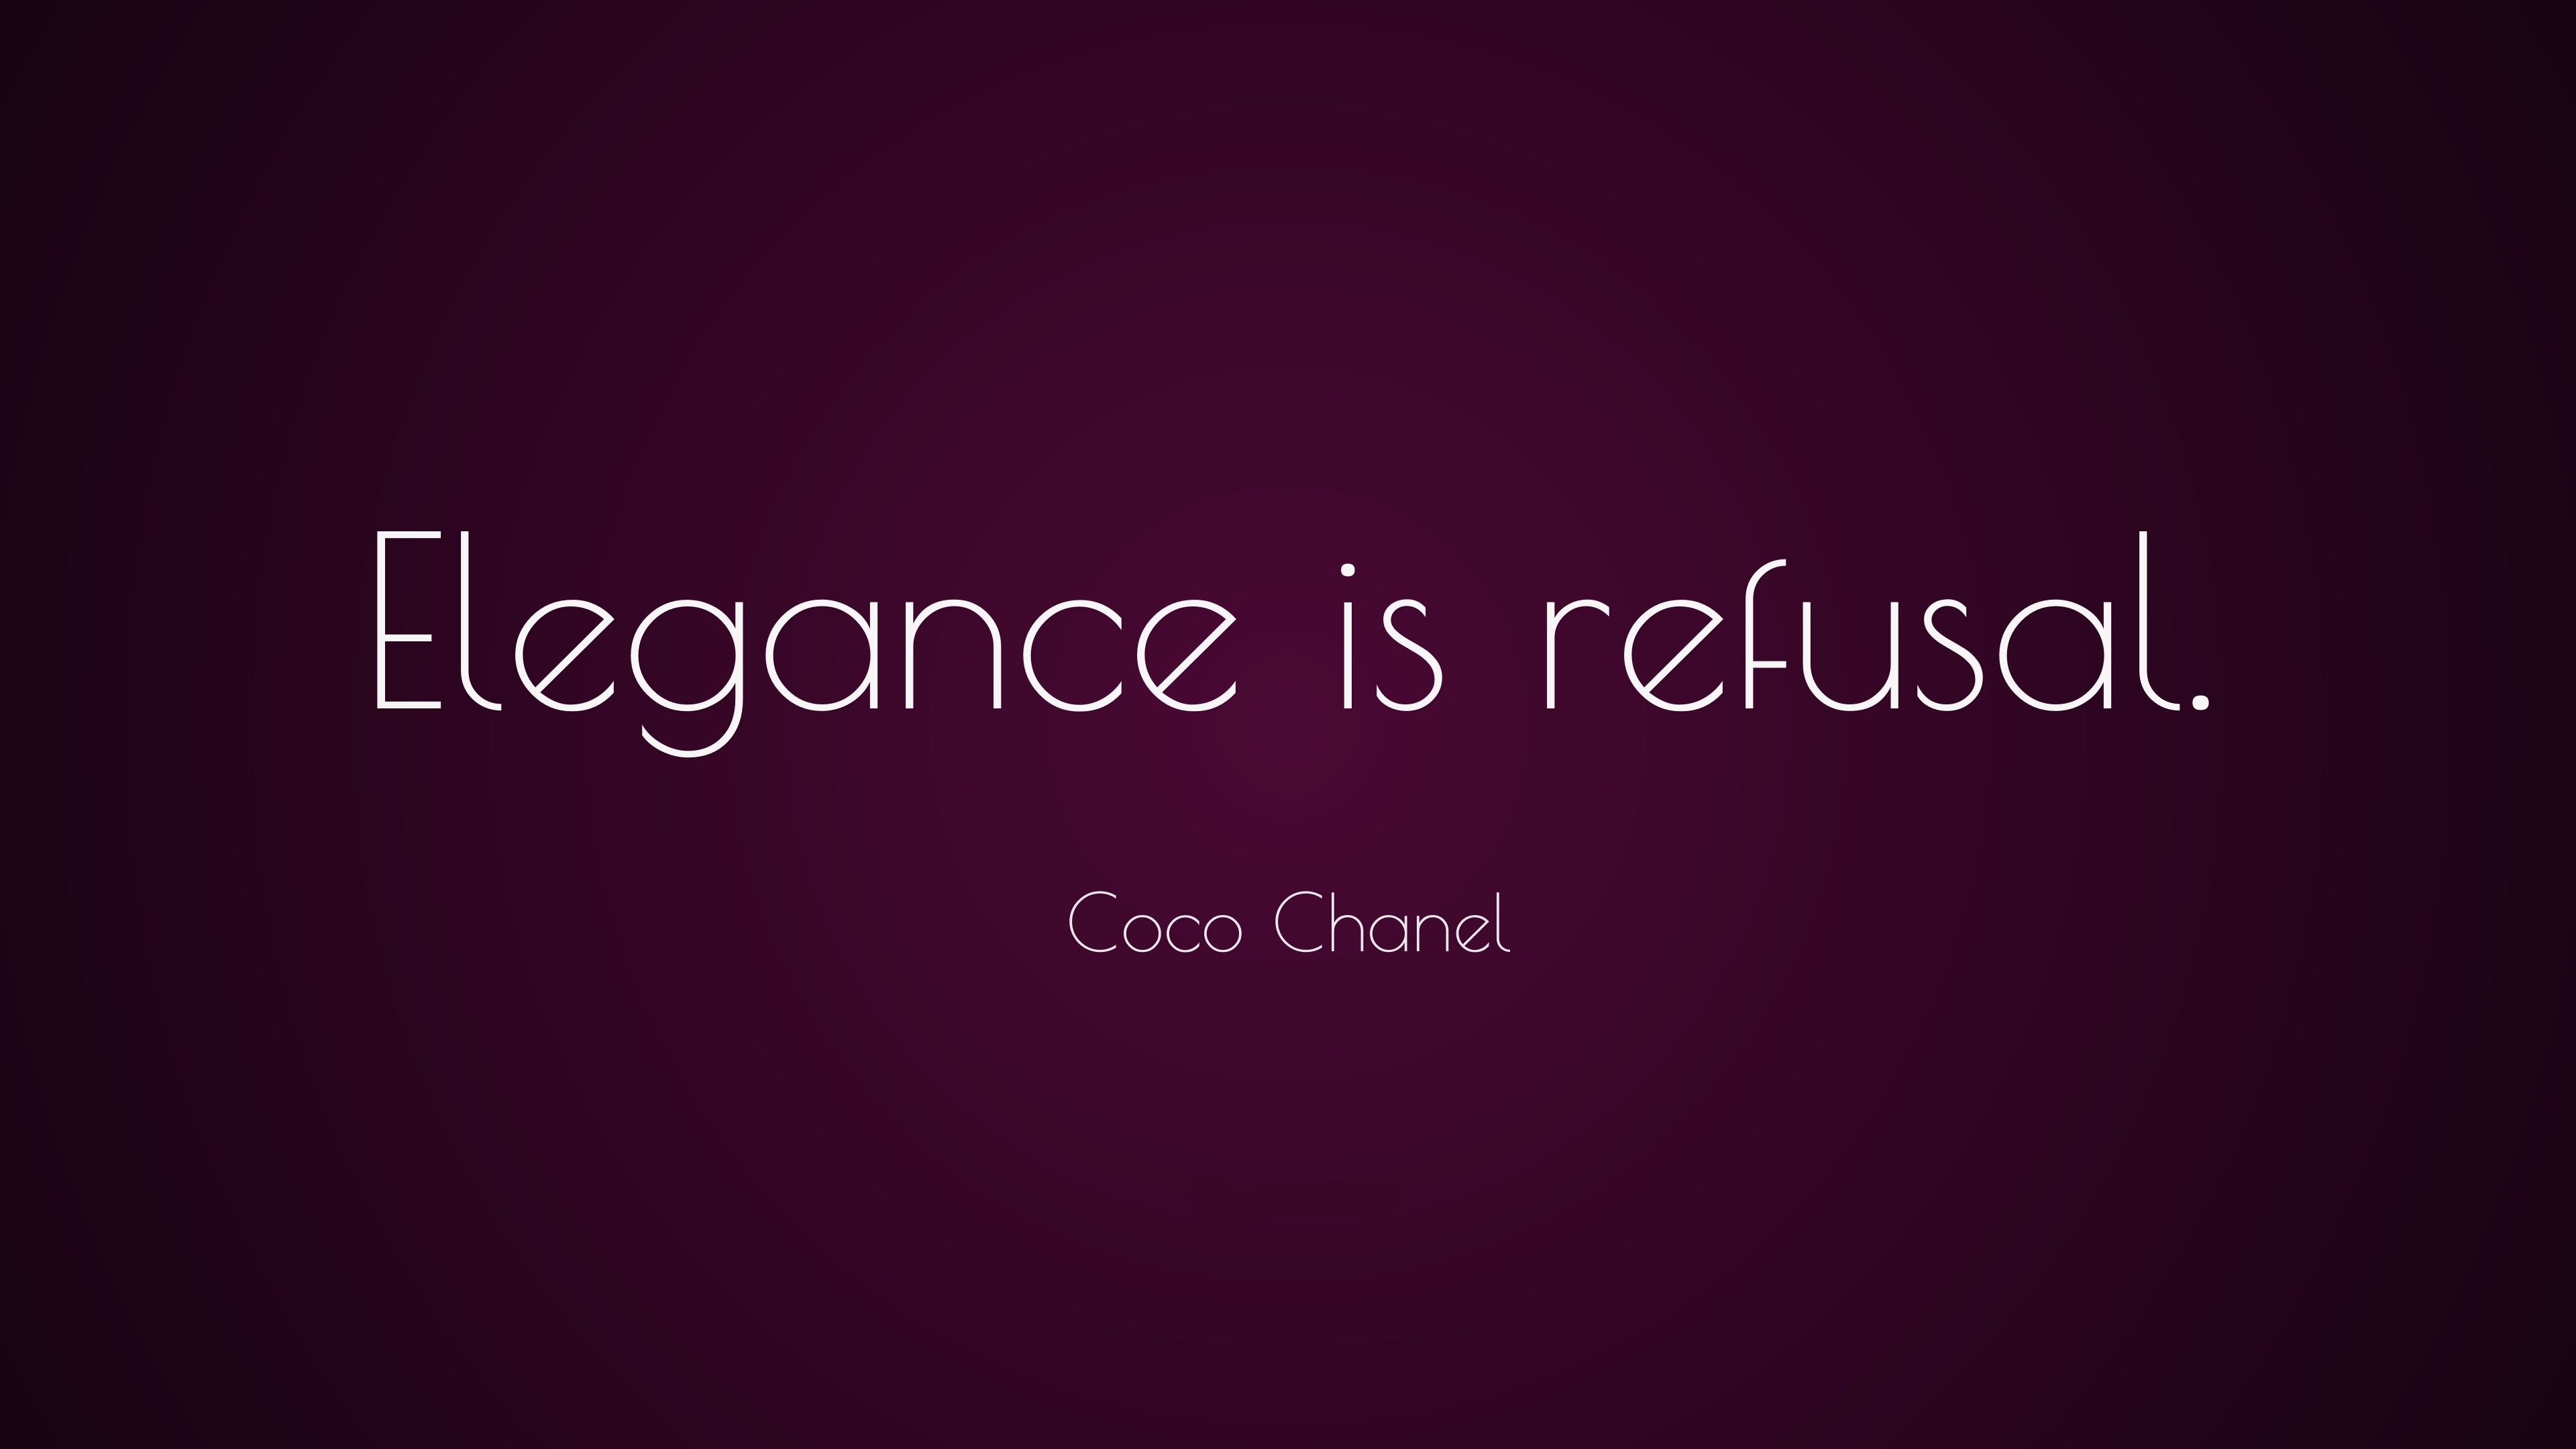 Coco Chanel Quote: “Elegance is refusal.”